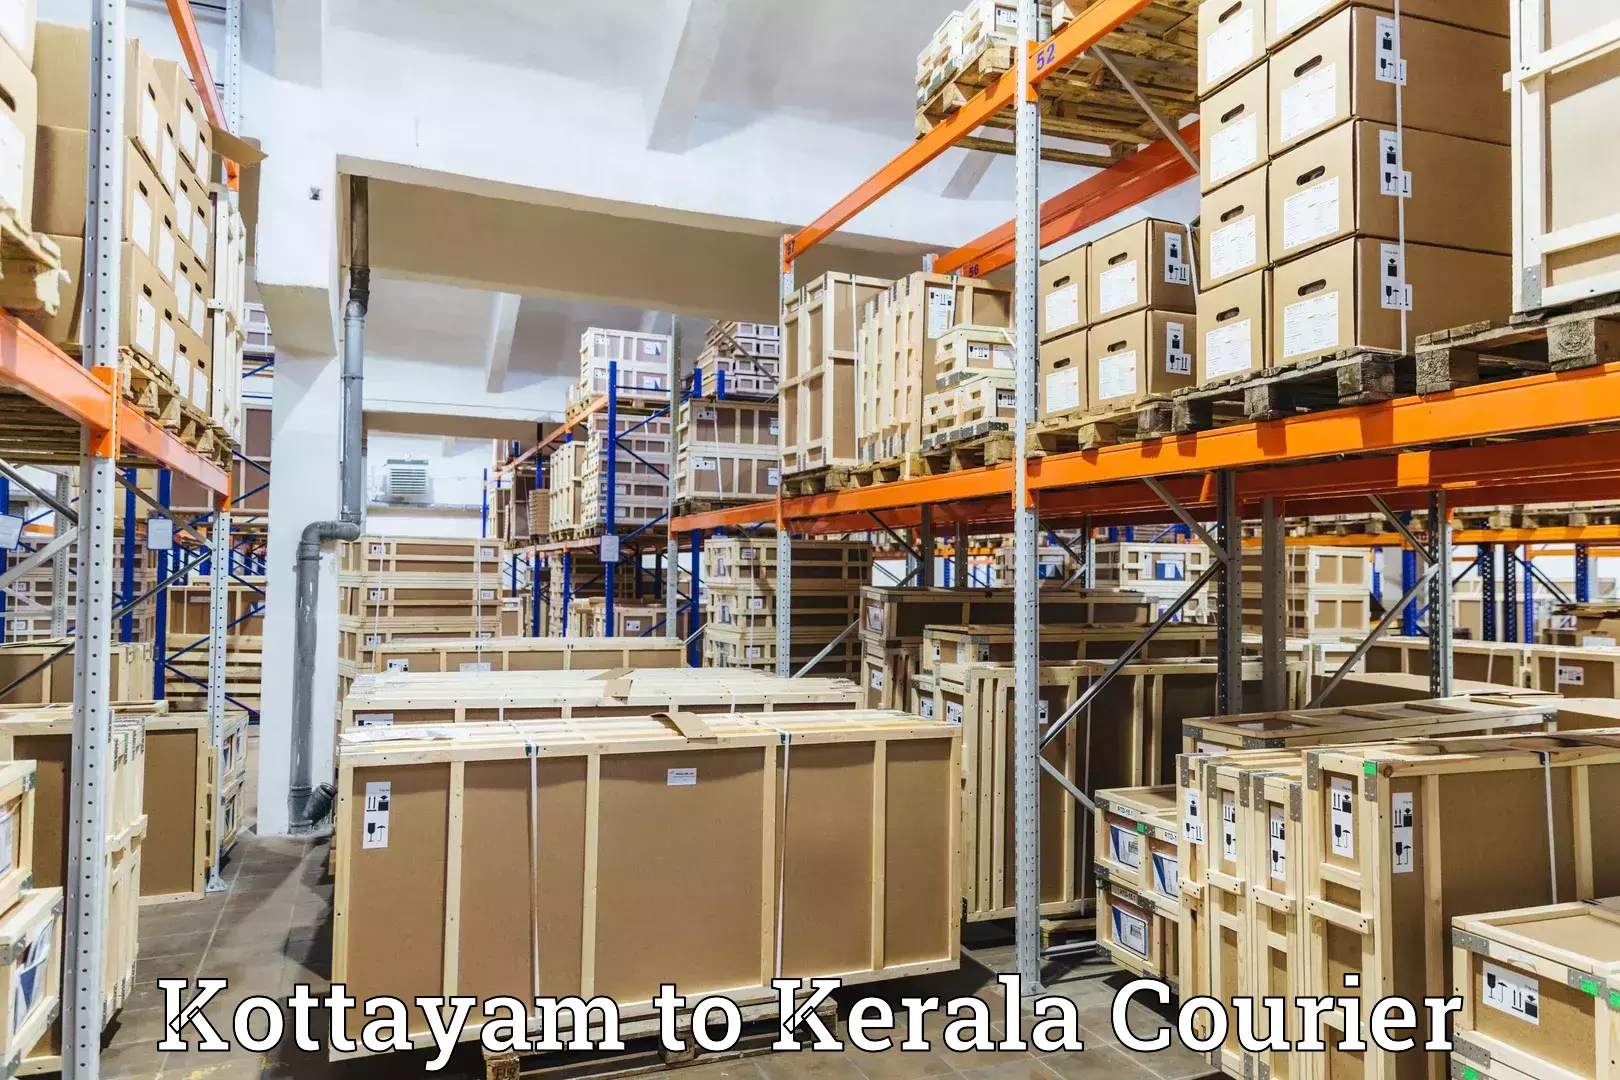 Package delivery network Kottayam to Cochin Port Kochi